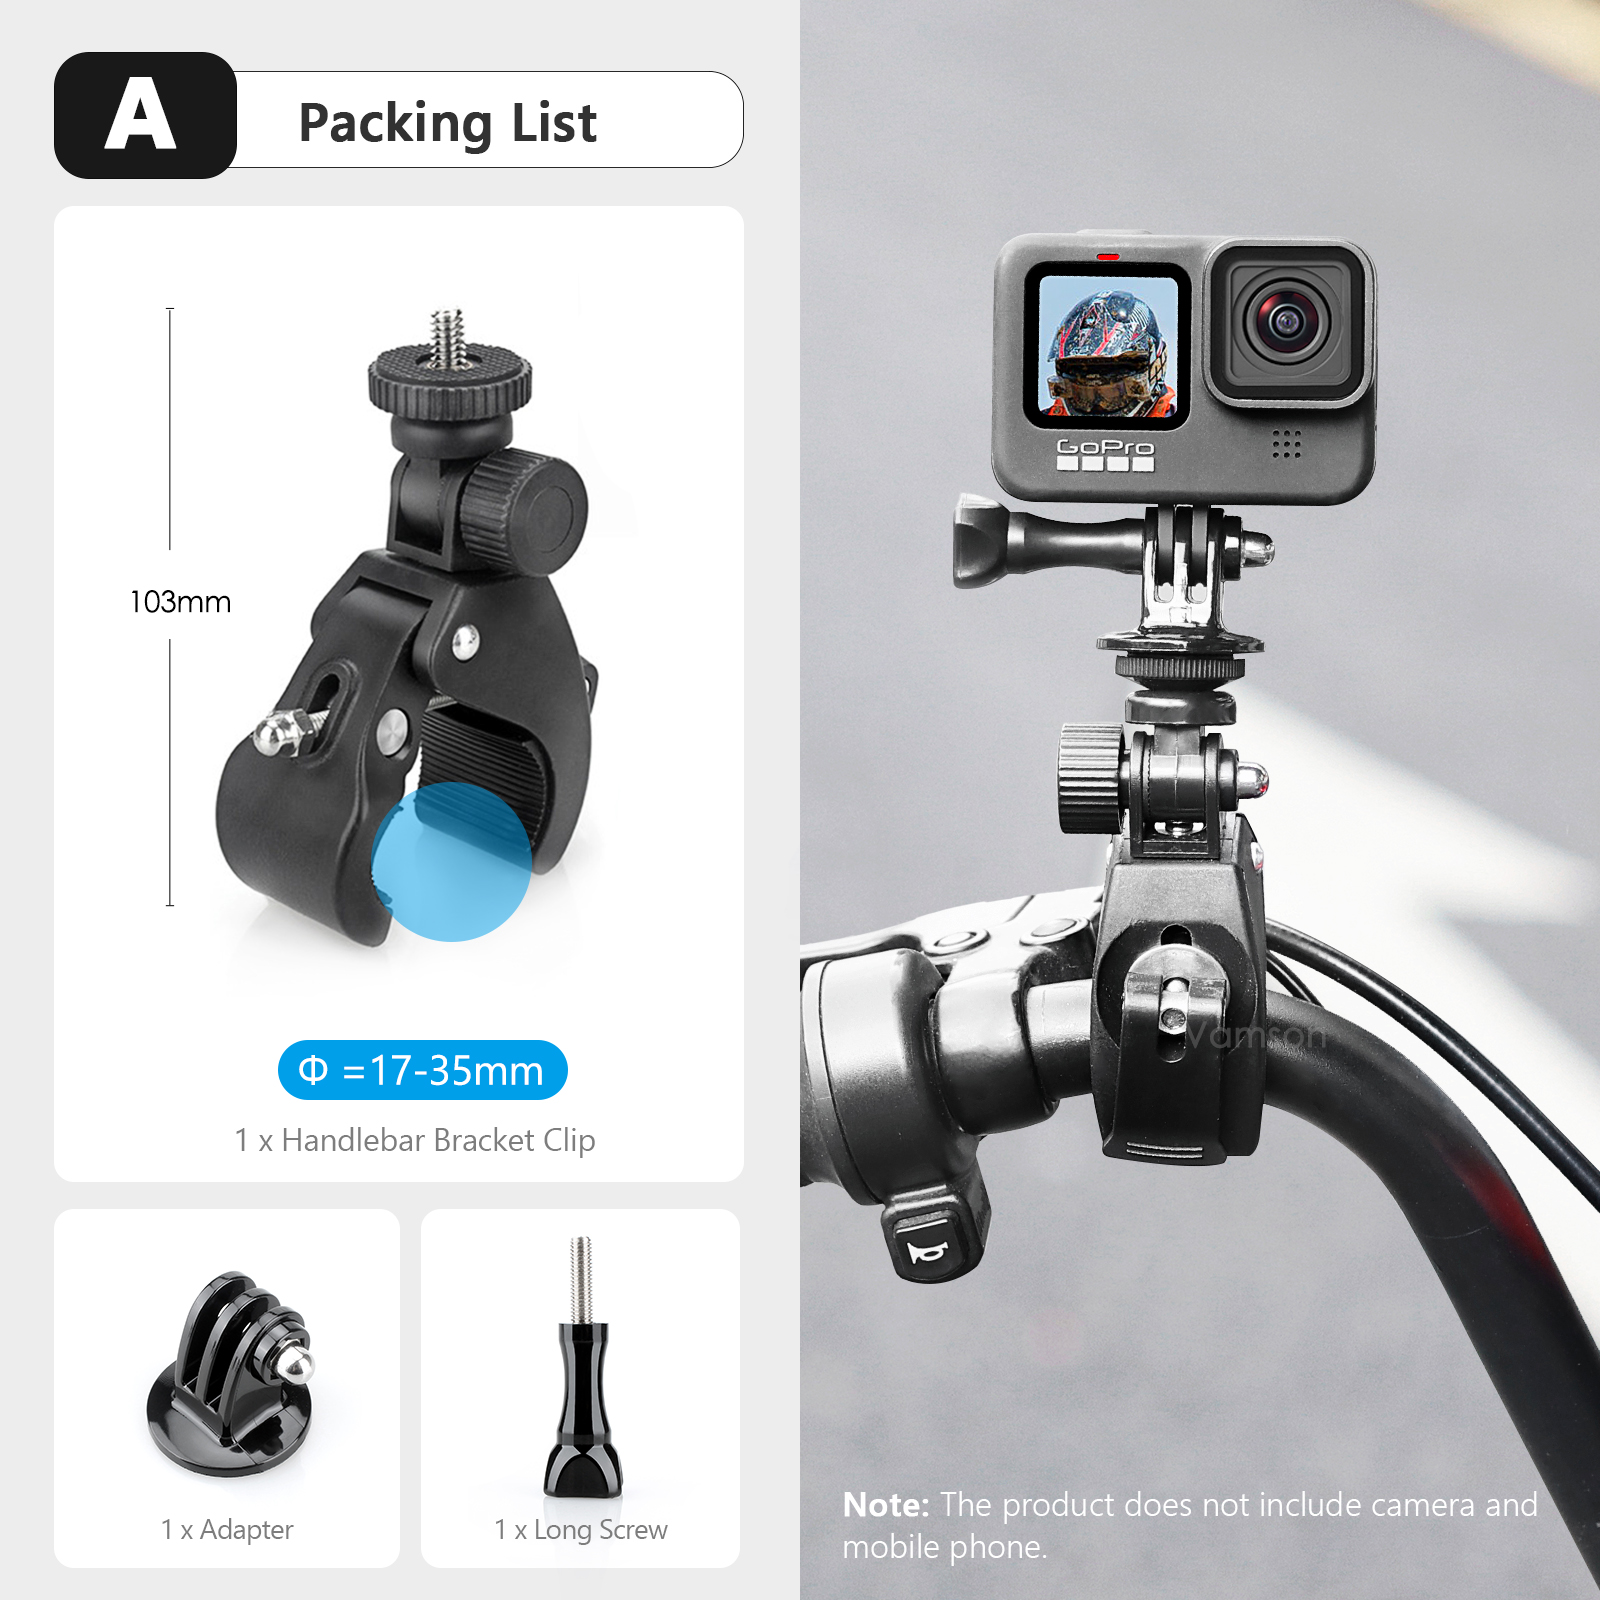 Vamson for Insta360 X3 One X2 Action Camera Motorcycle Accessories